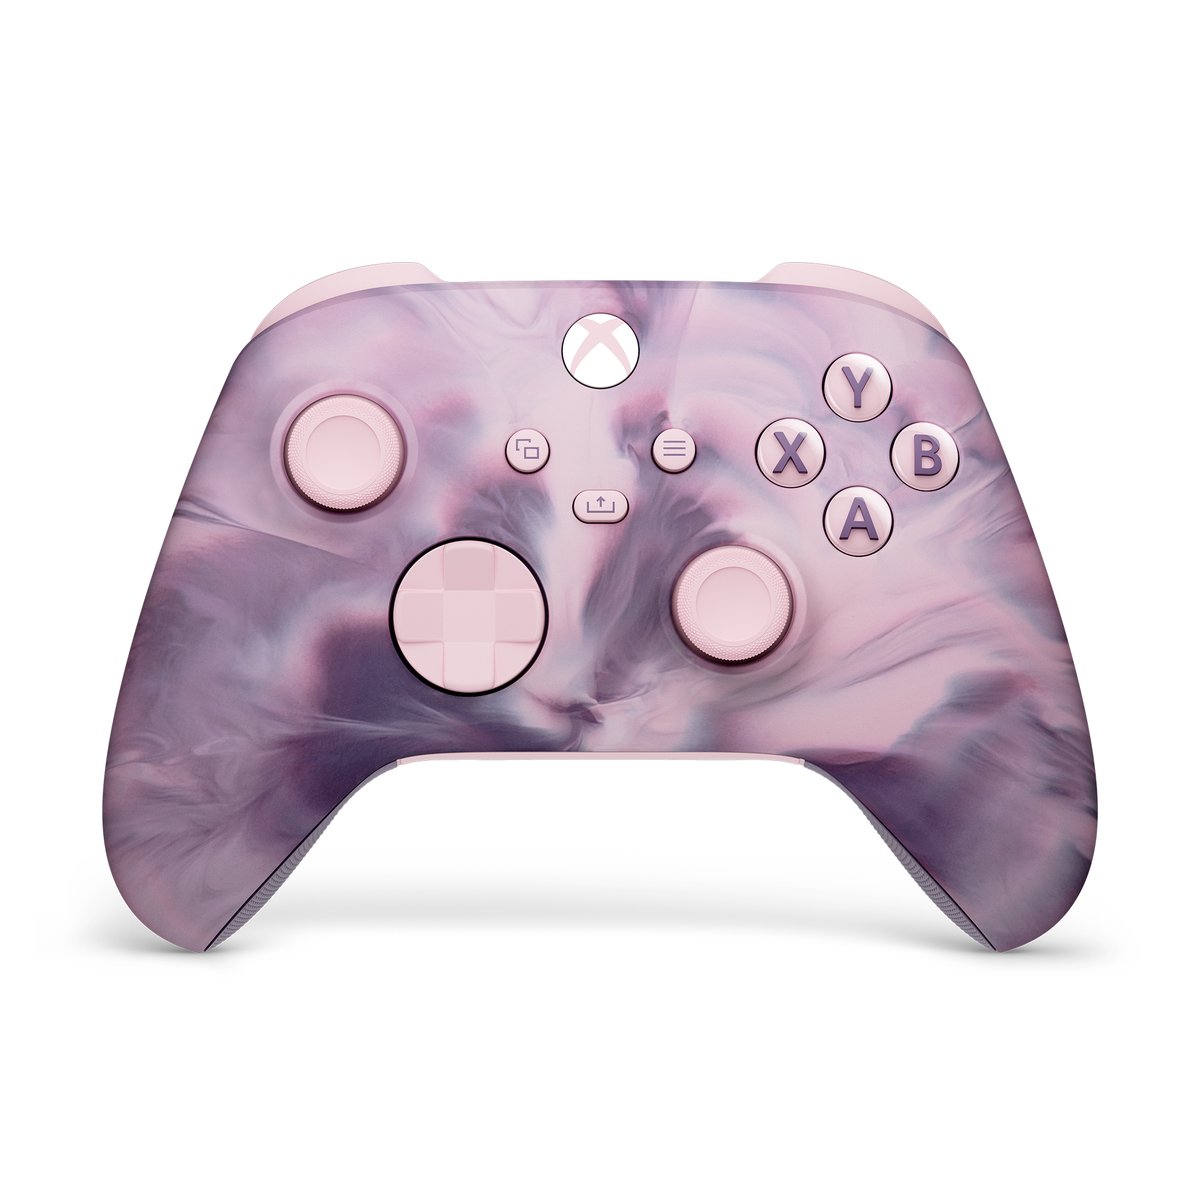 In case you missed it The Xbox Dream Vapor Special Edition Wireless Controller will be available from selected retailers as from 8 March. ☁ BT Games ☁ Computer Mania ☁ Evetech ☁ Game4U ☁ Hi-Fi Corp ☁ Incredible ☁ Makro ☁ Nexus ☁ Takealot ☁ Zapa Gaming